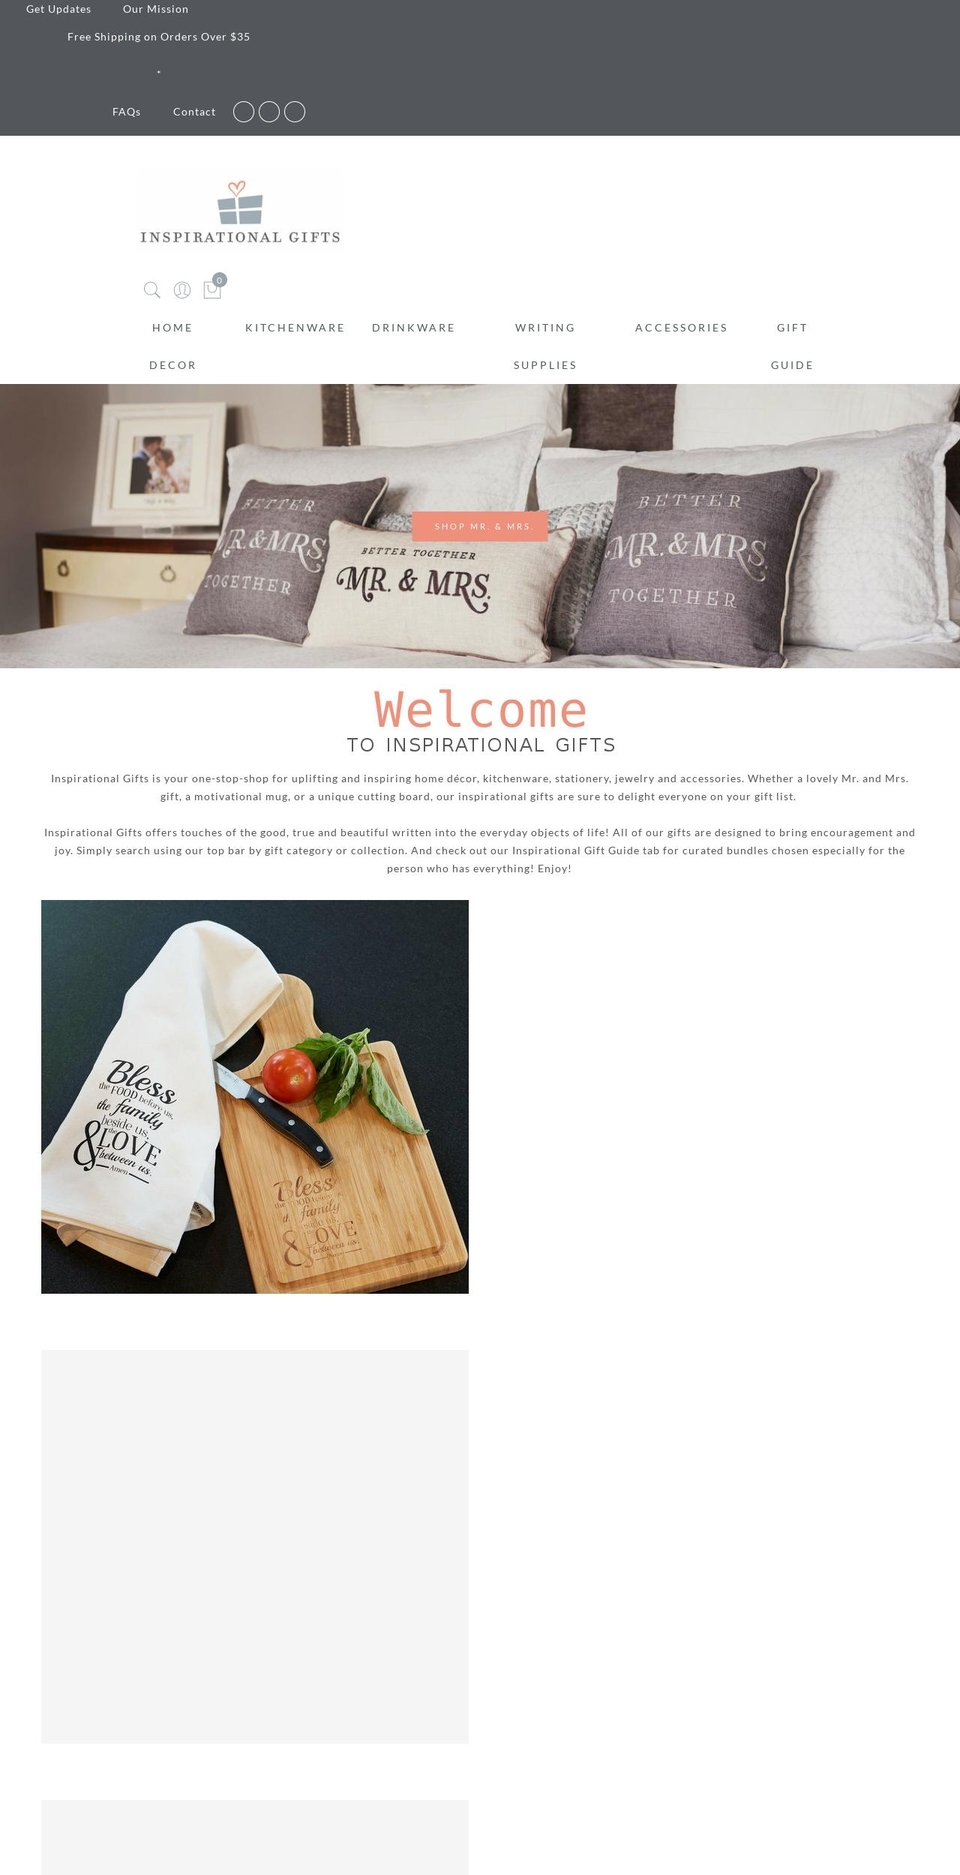 Gifts Shopify theme site example inspirationalgifts.com